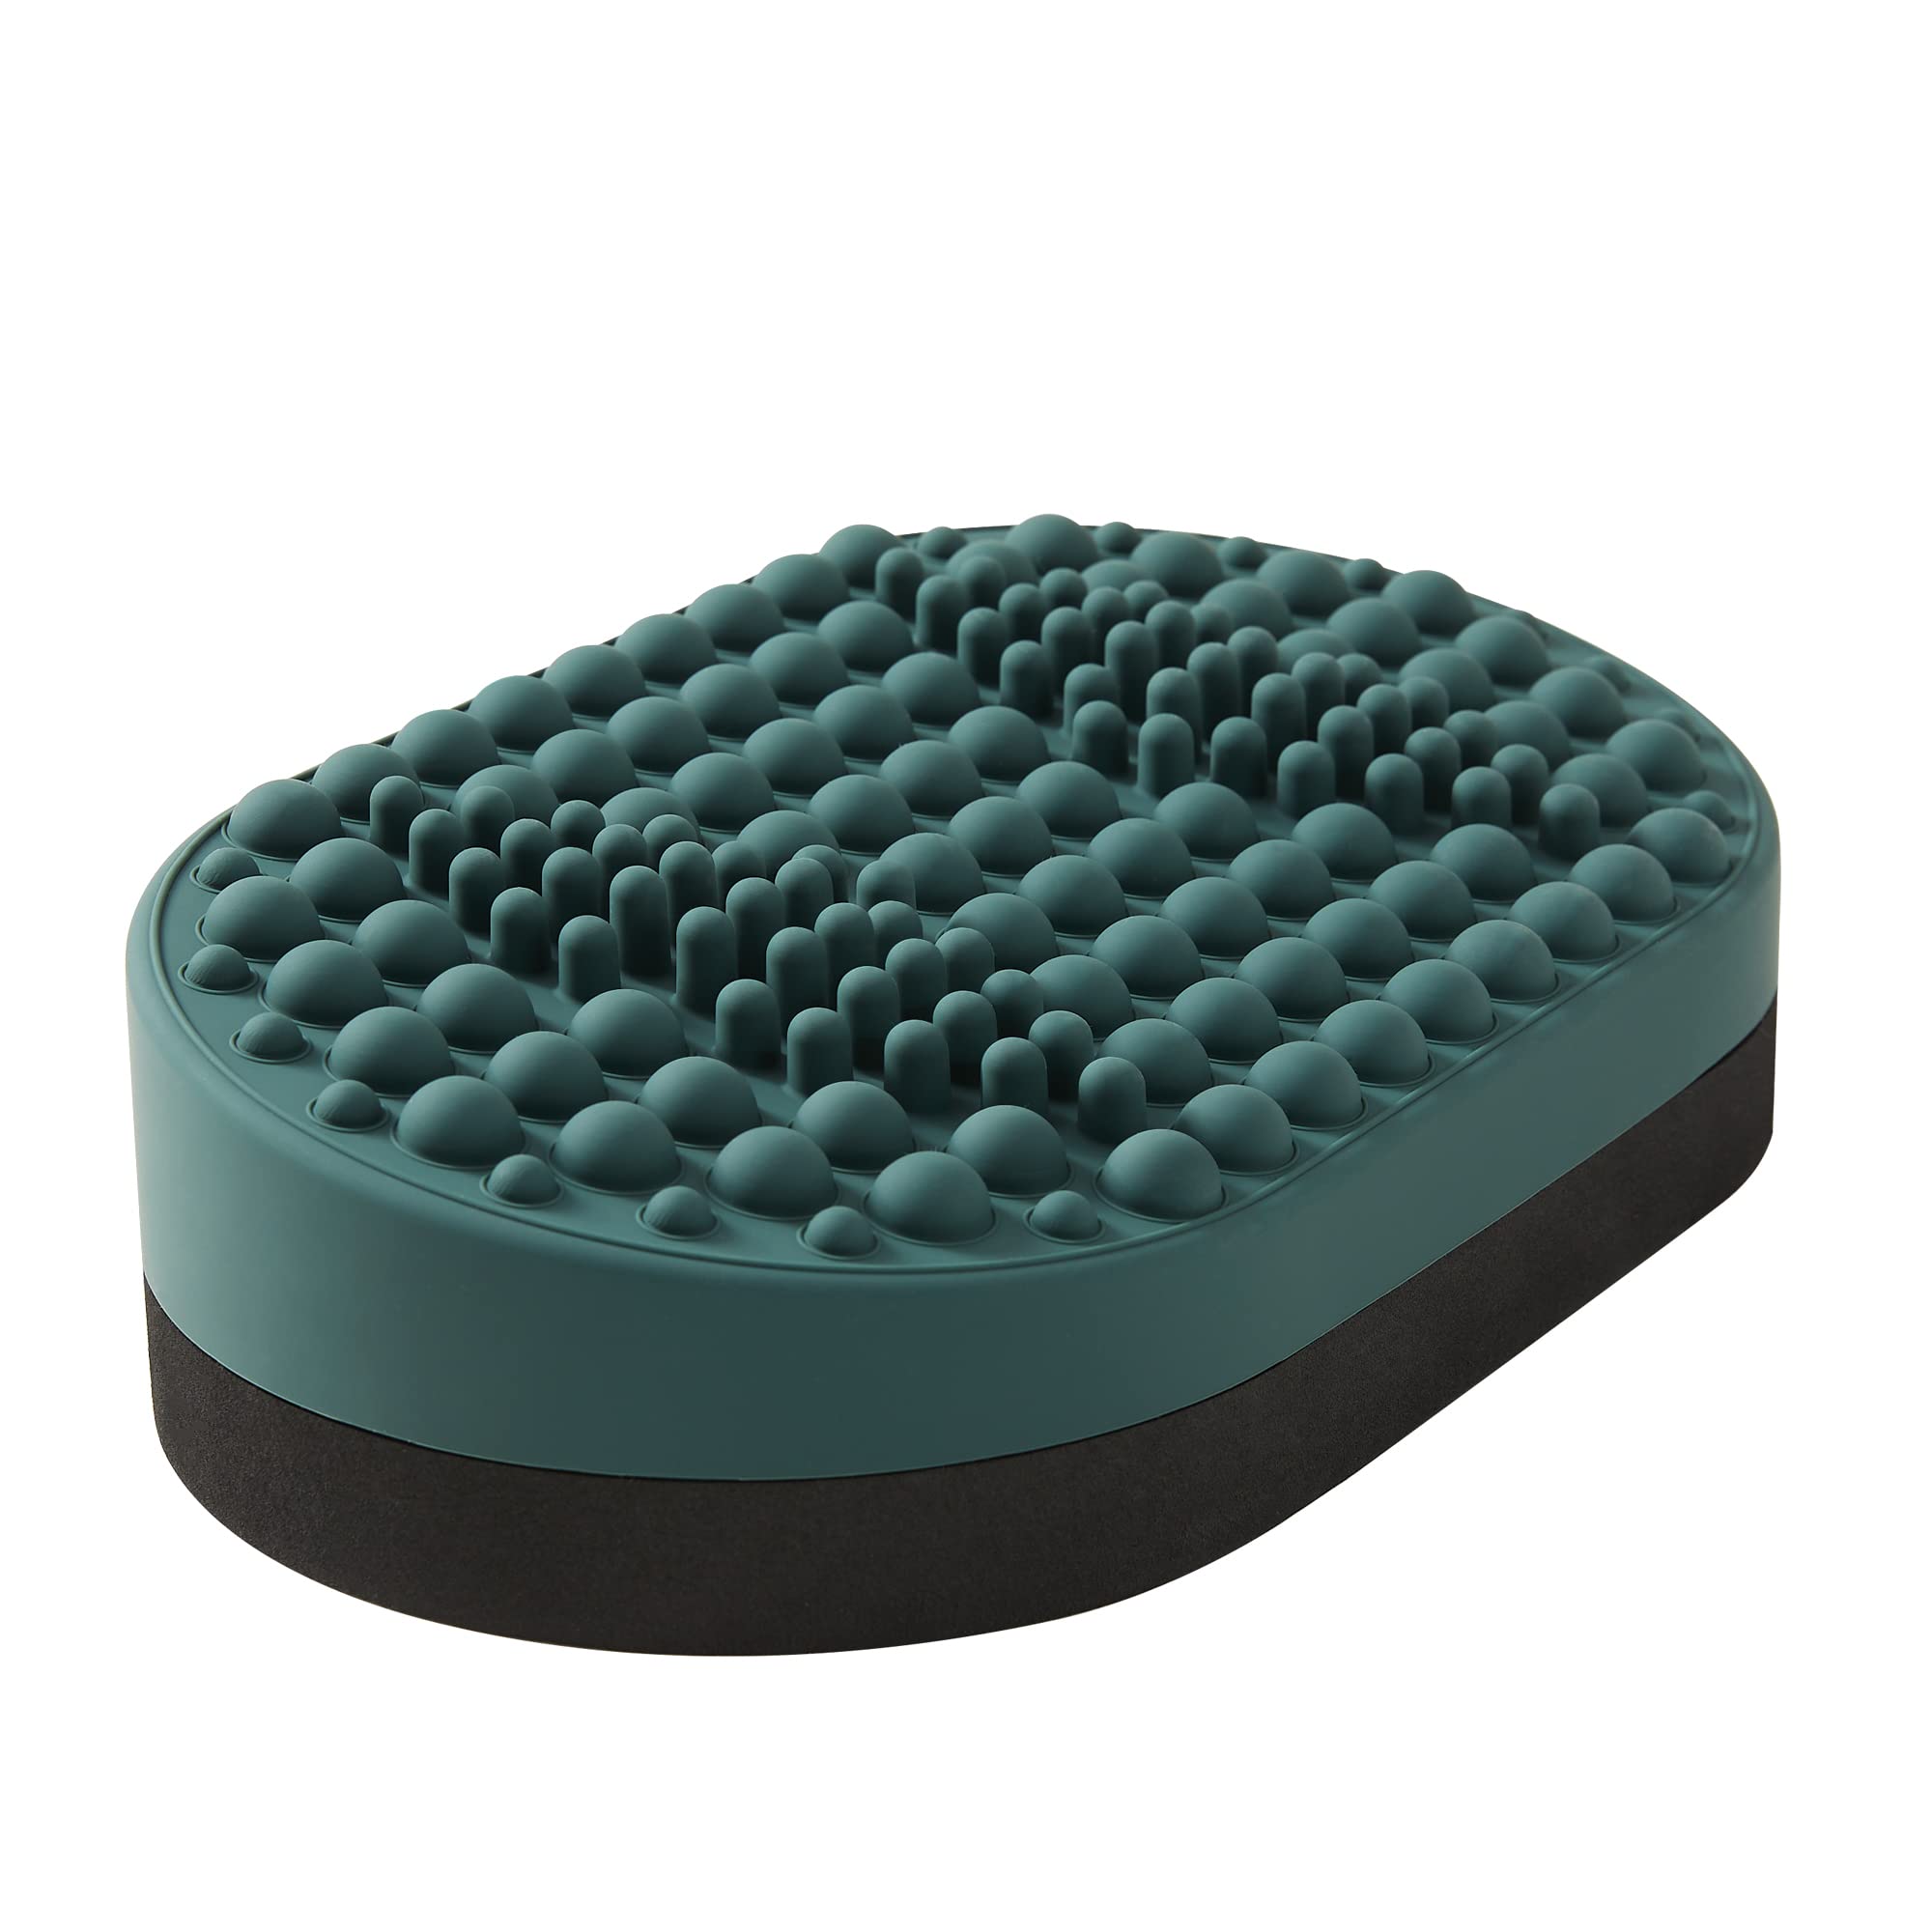 Foot Rest for Under Desk at Work,Home Office Foot Stool Foot Massager  Plantar Fasciitis Relief,Footrests,Anti-Fatigue Fidget Toy - AliExpress